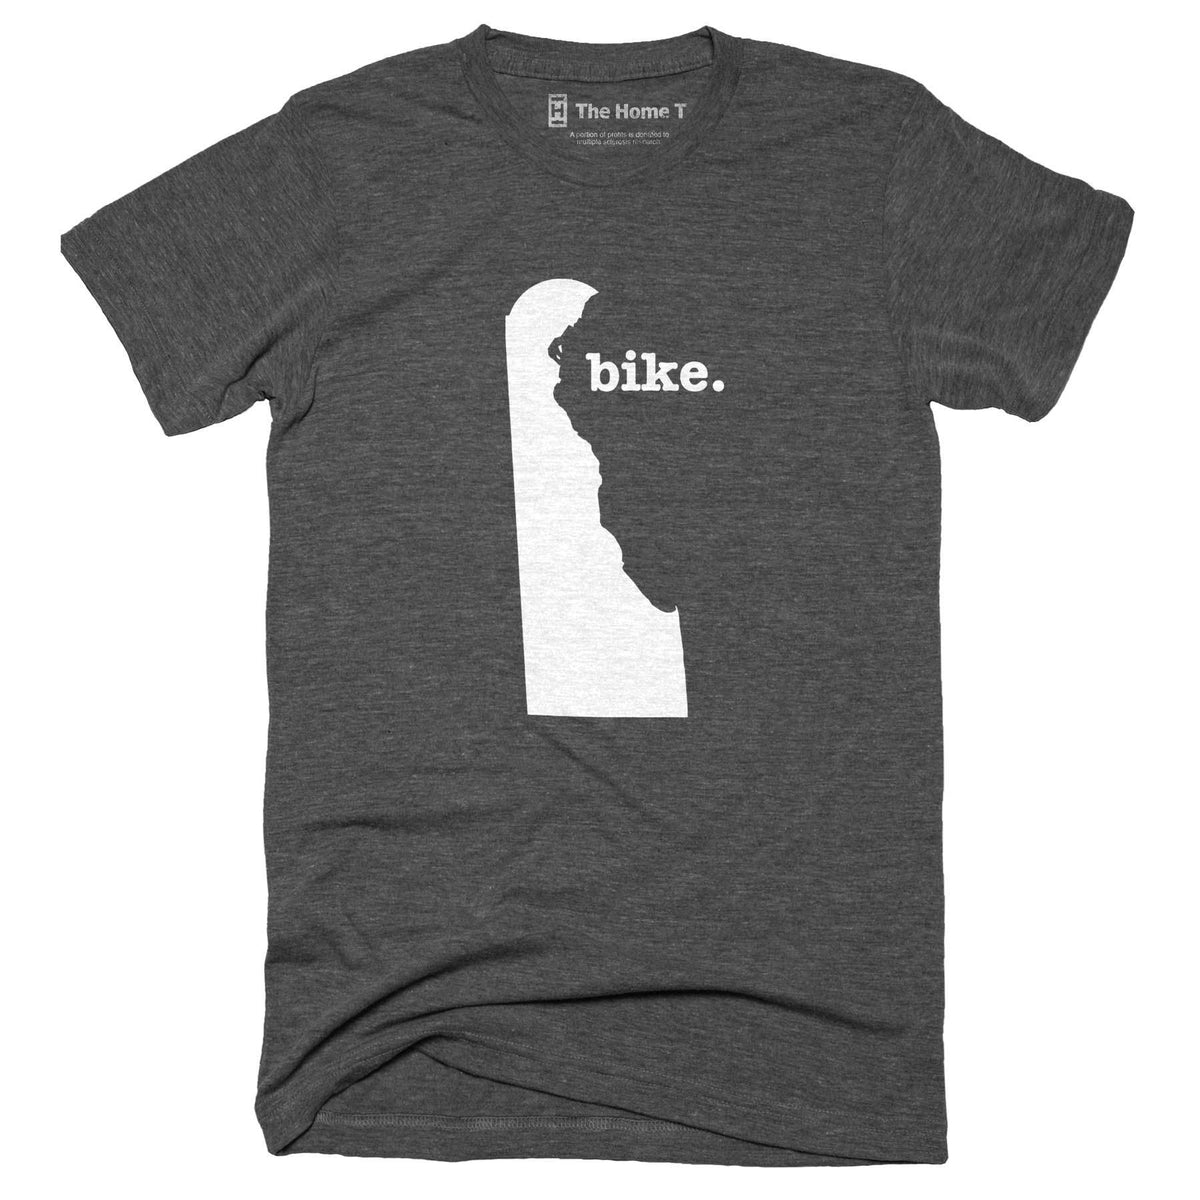 Delaware Bike Home T-Shirt Outdoor Collection The Home T XS Grey